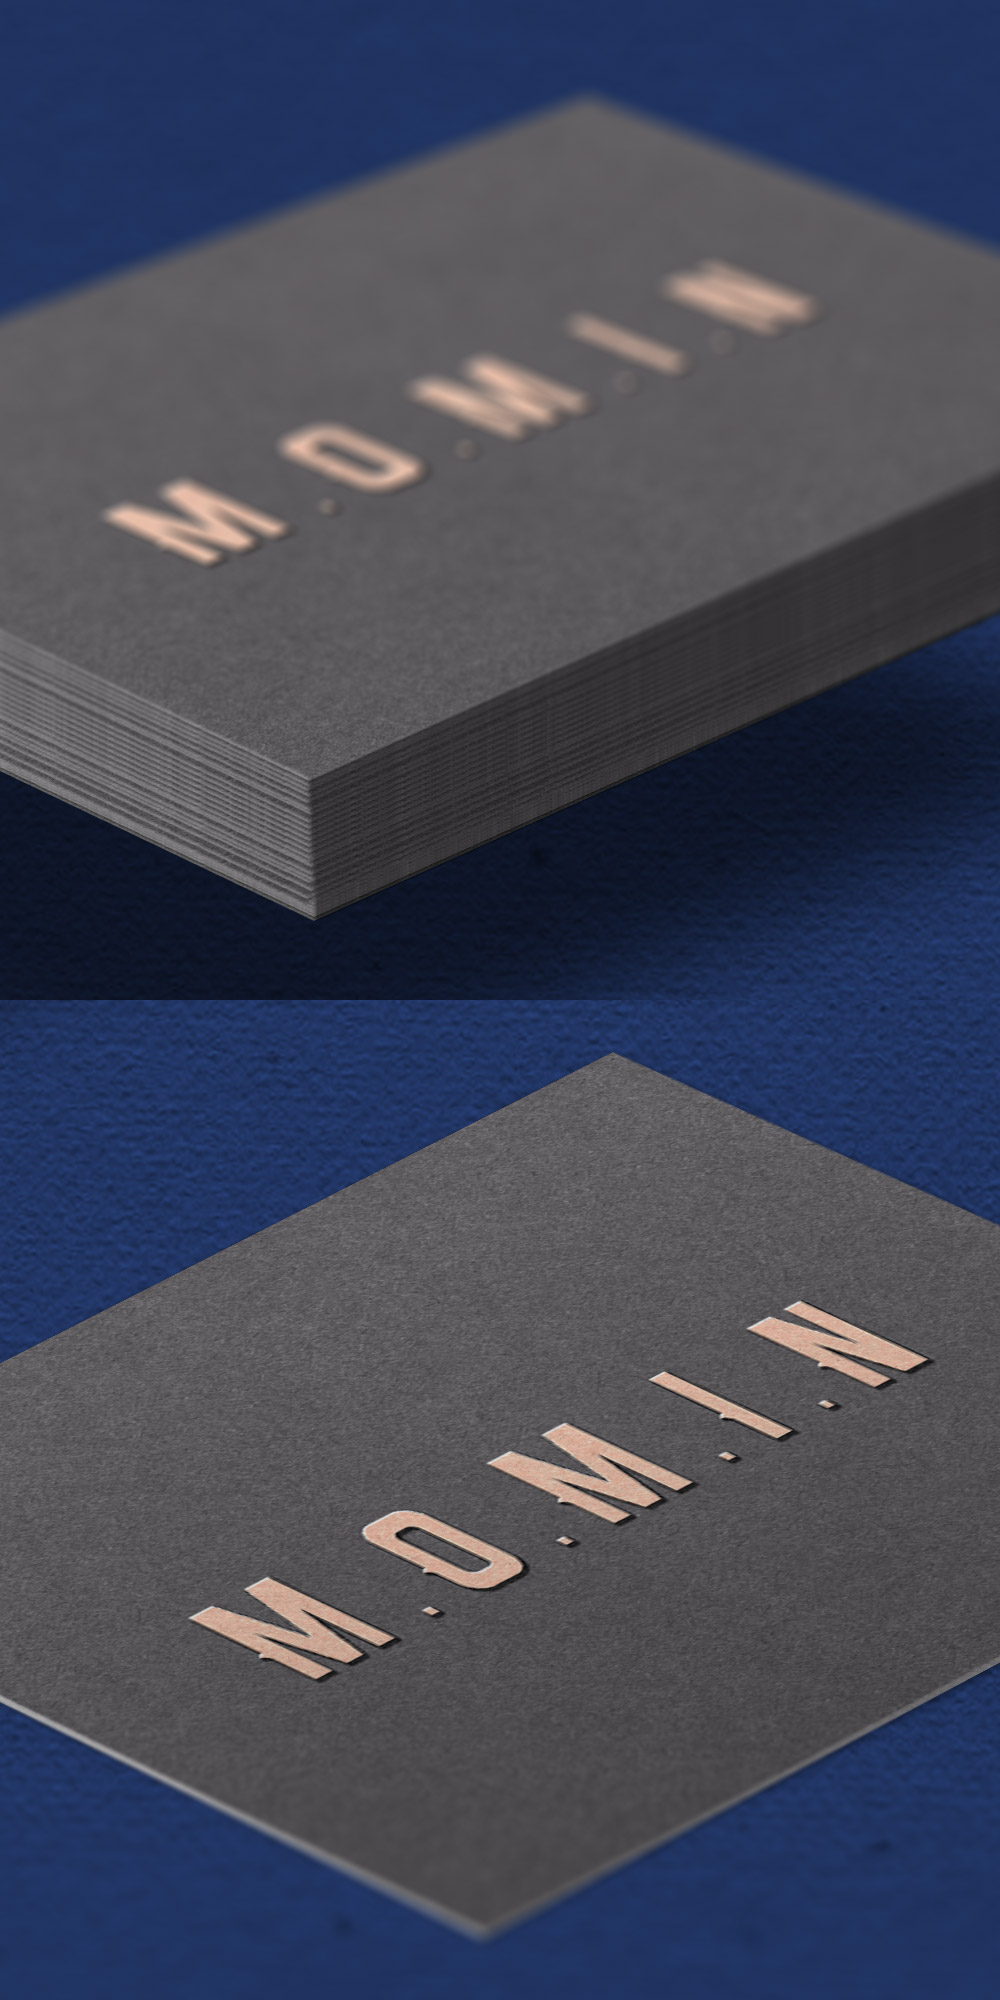 Business Card Mockup PSD Free Download